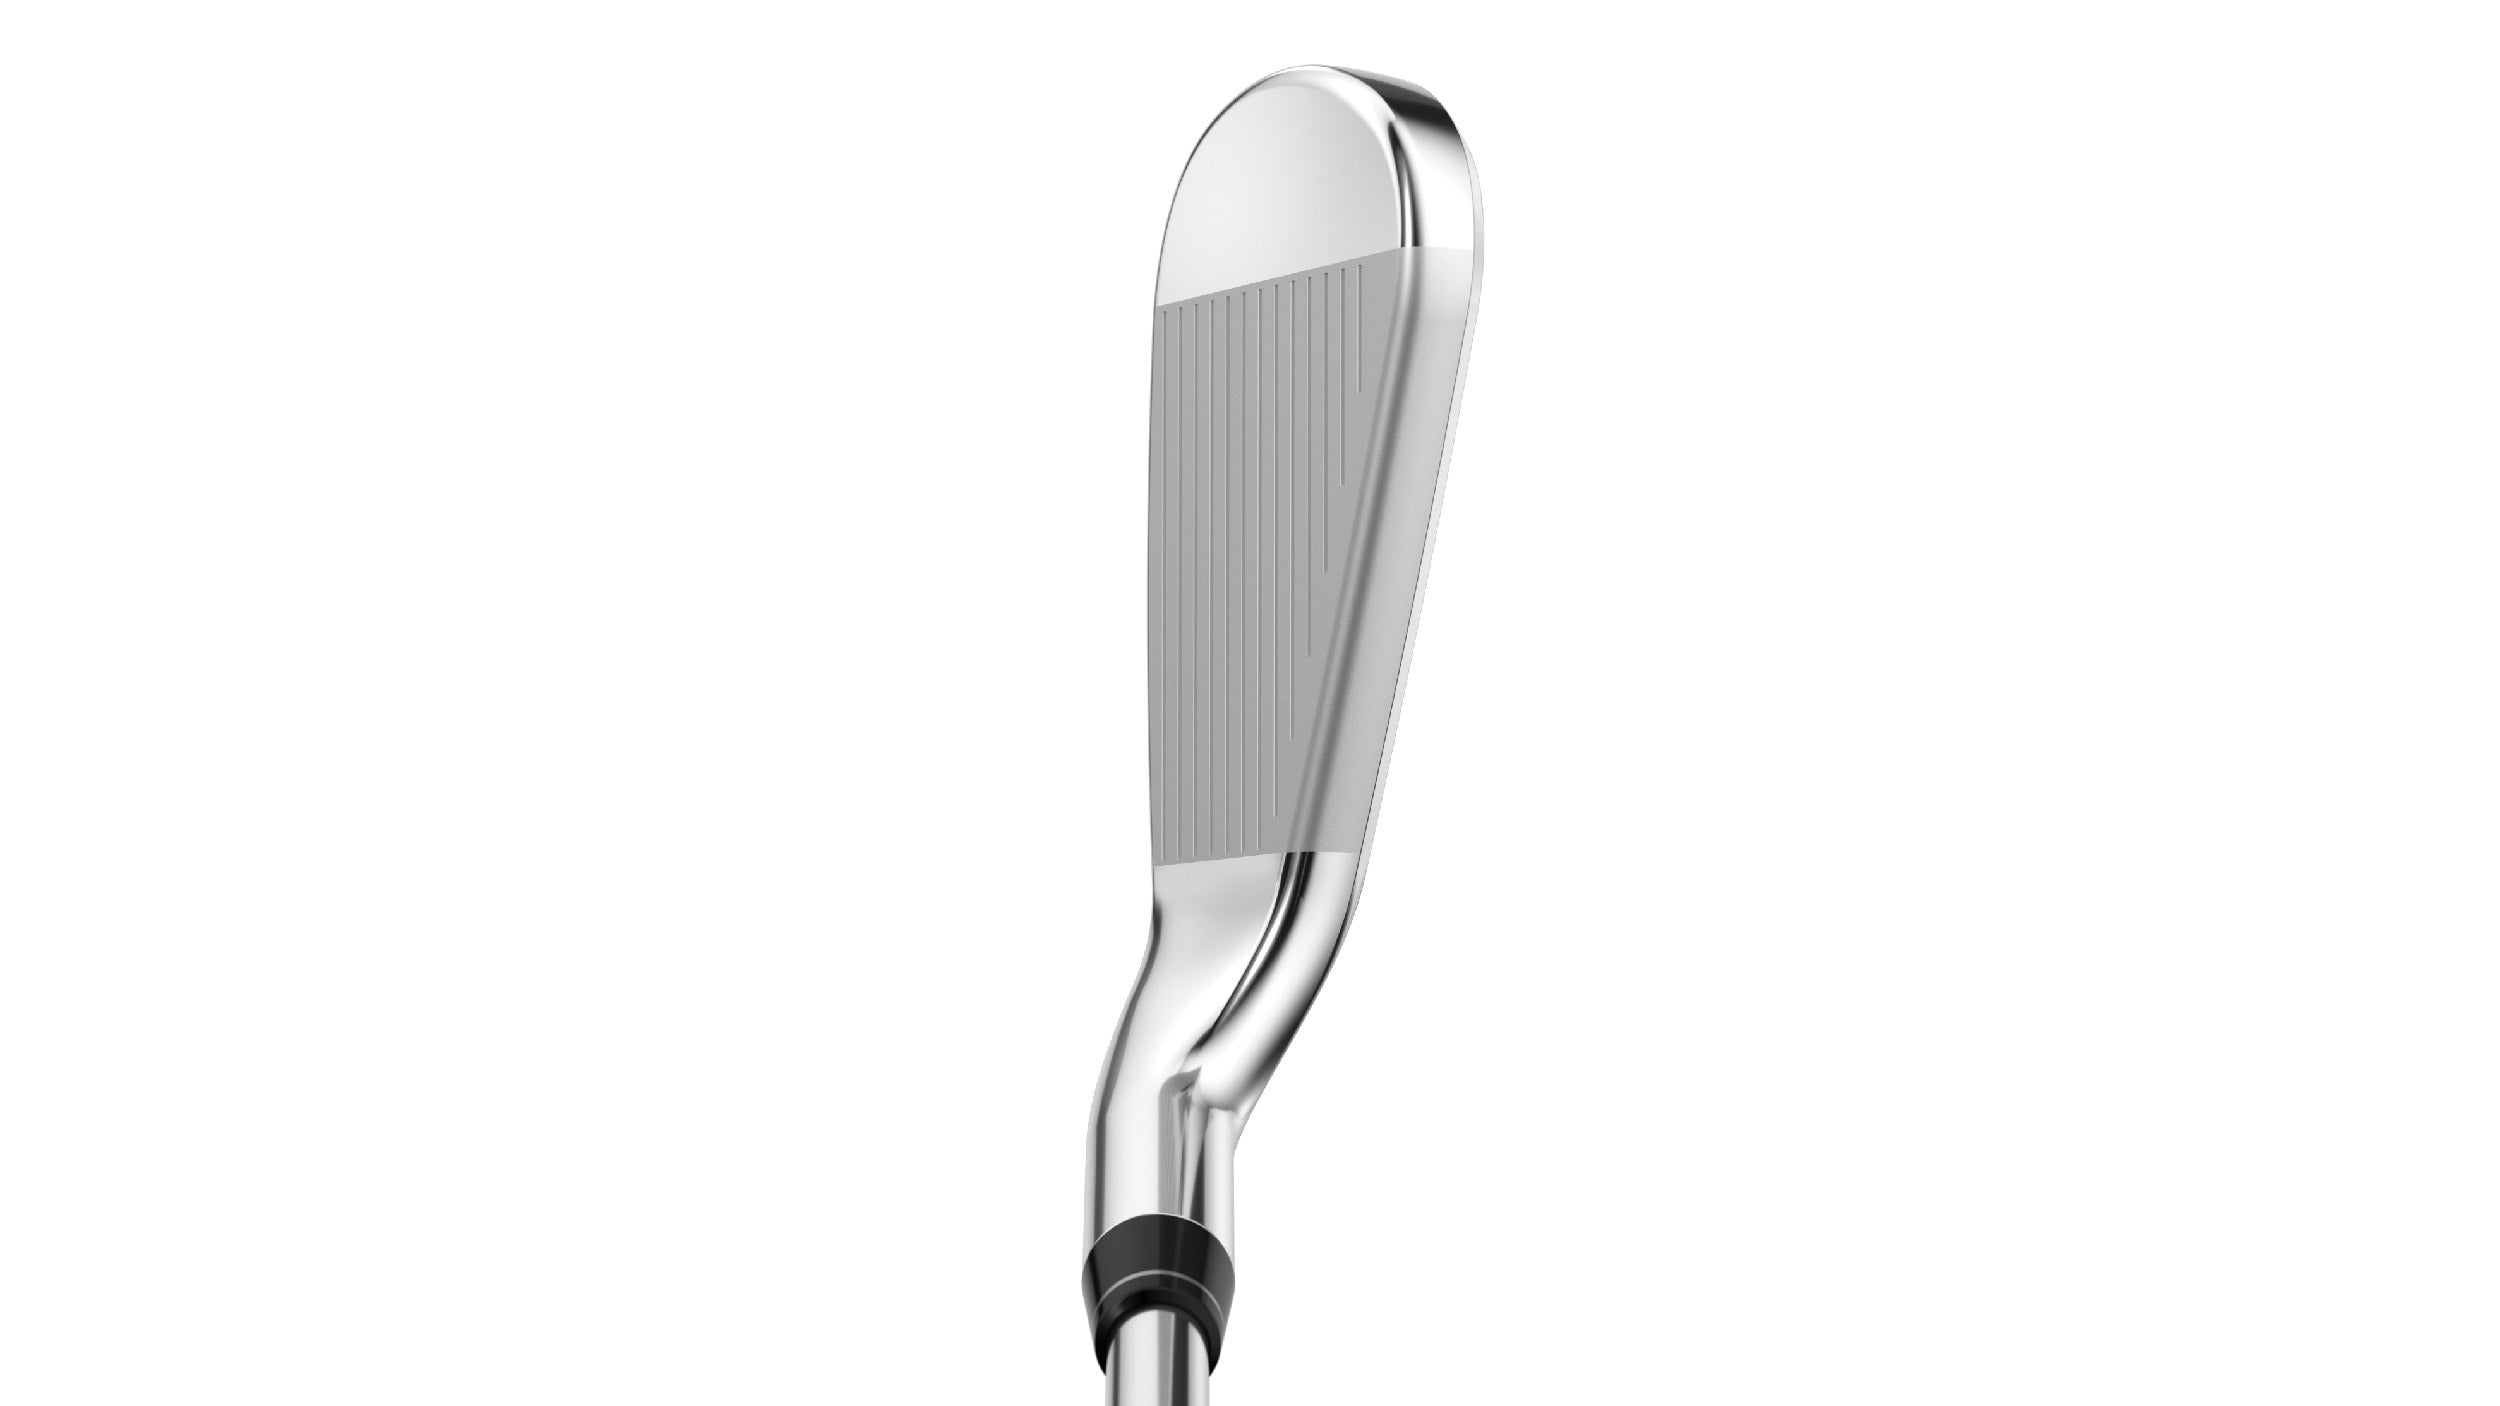 Callaway Paradym irons: Full reviews, robotic testing info and more